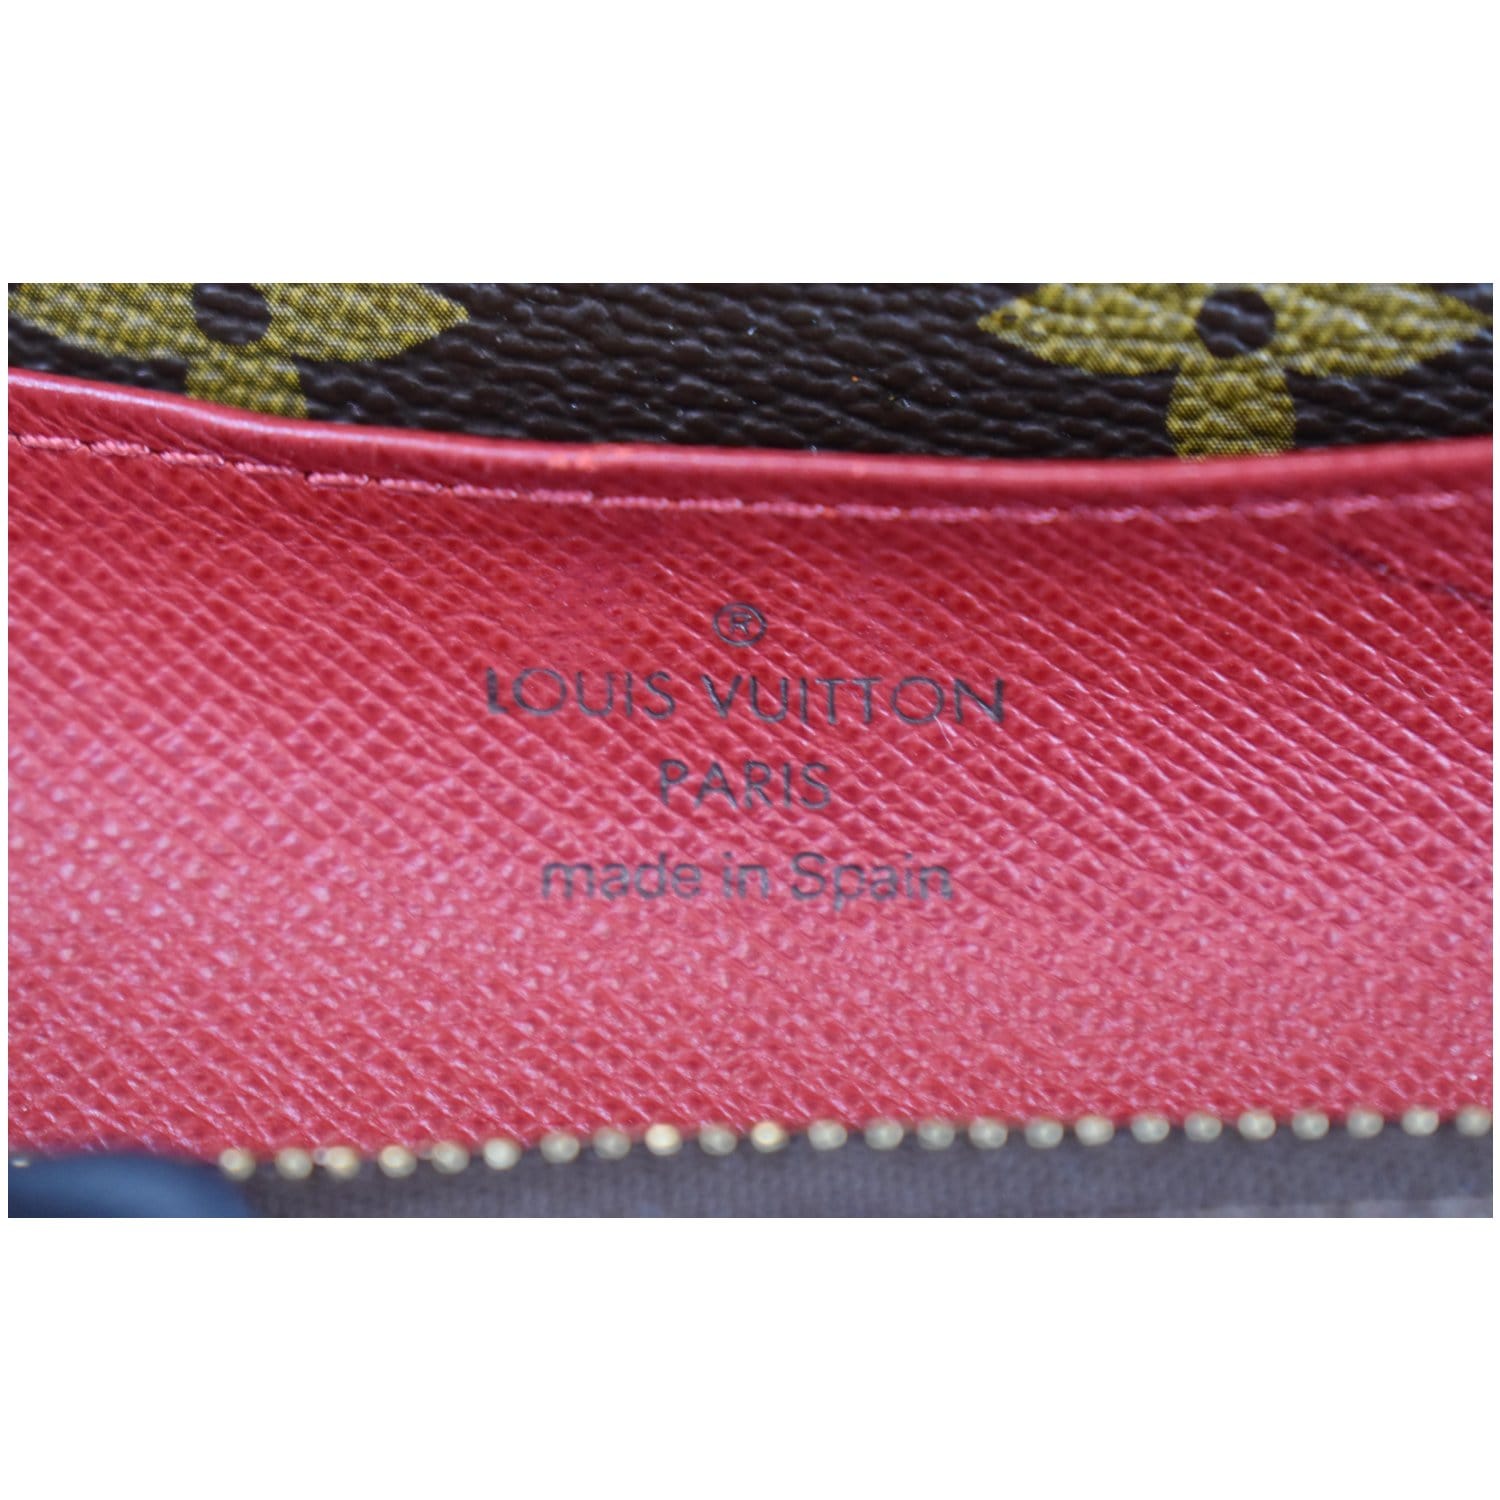 Emilie leather wallet Louis Vuitton Brown in Leather - 36530750